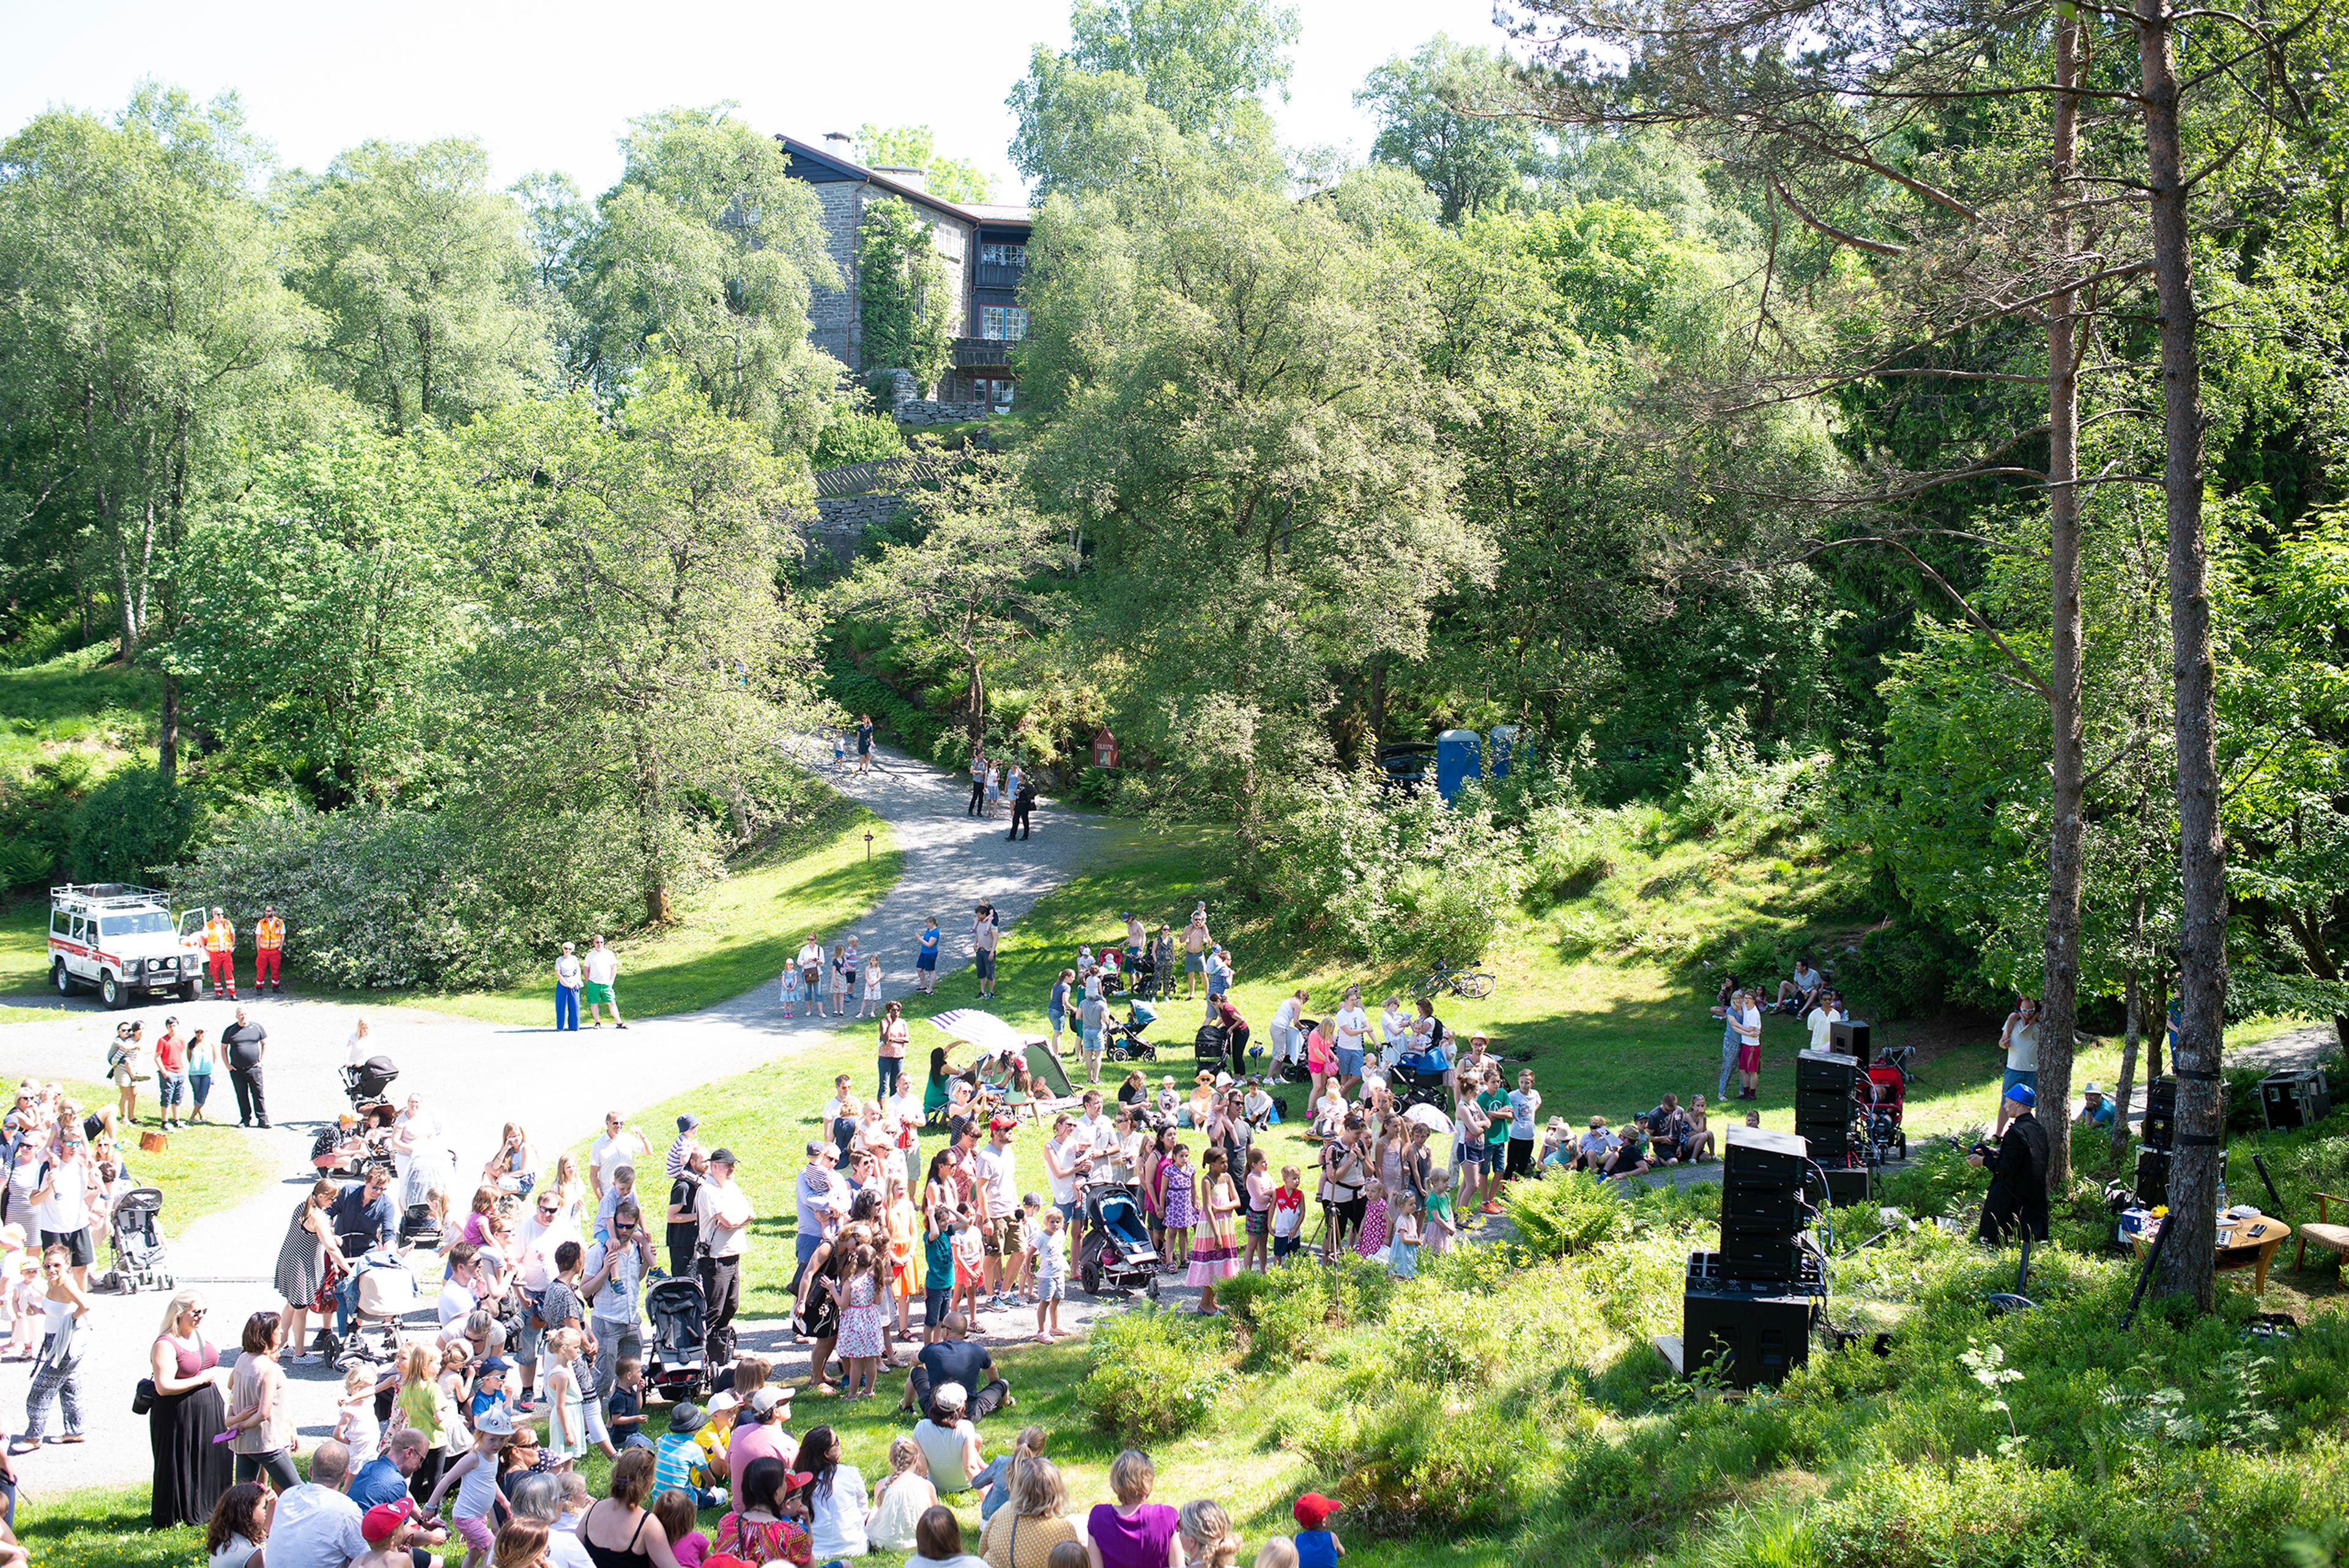 A large group of people outside at Siljustøl. We can see the dark brown house in the background. It is summer.